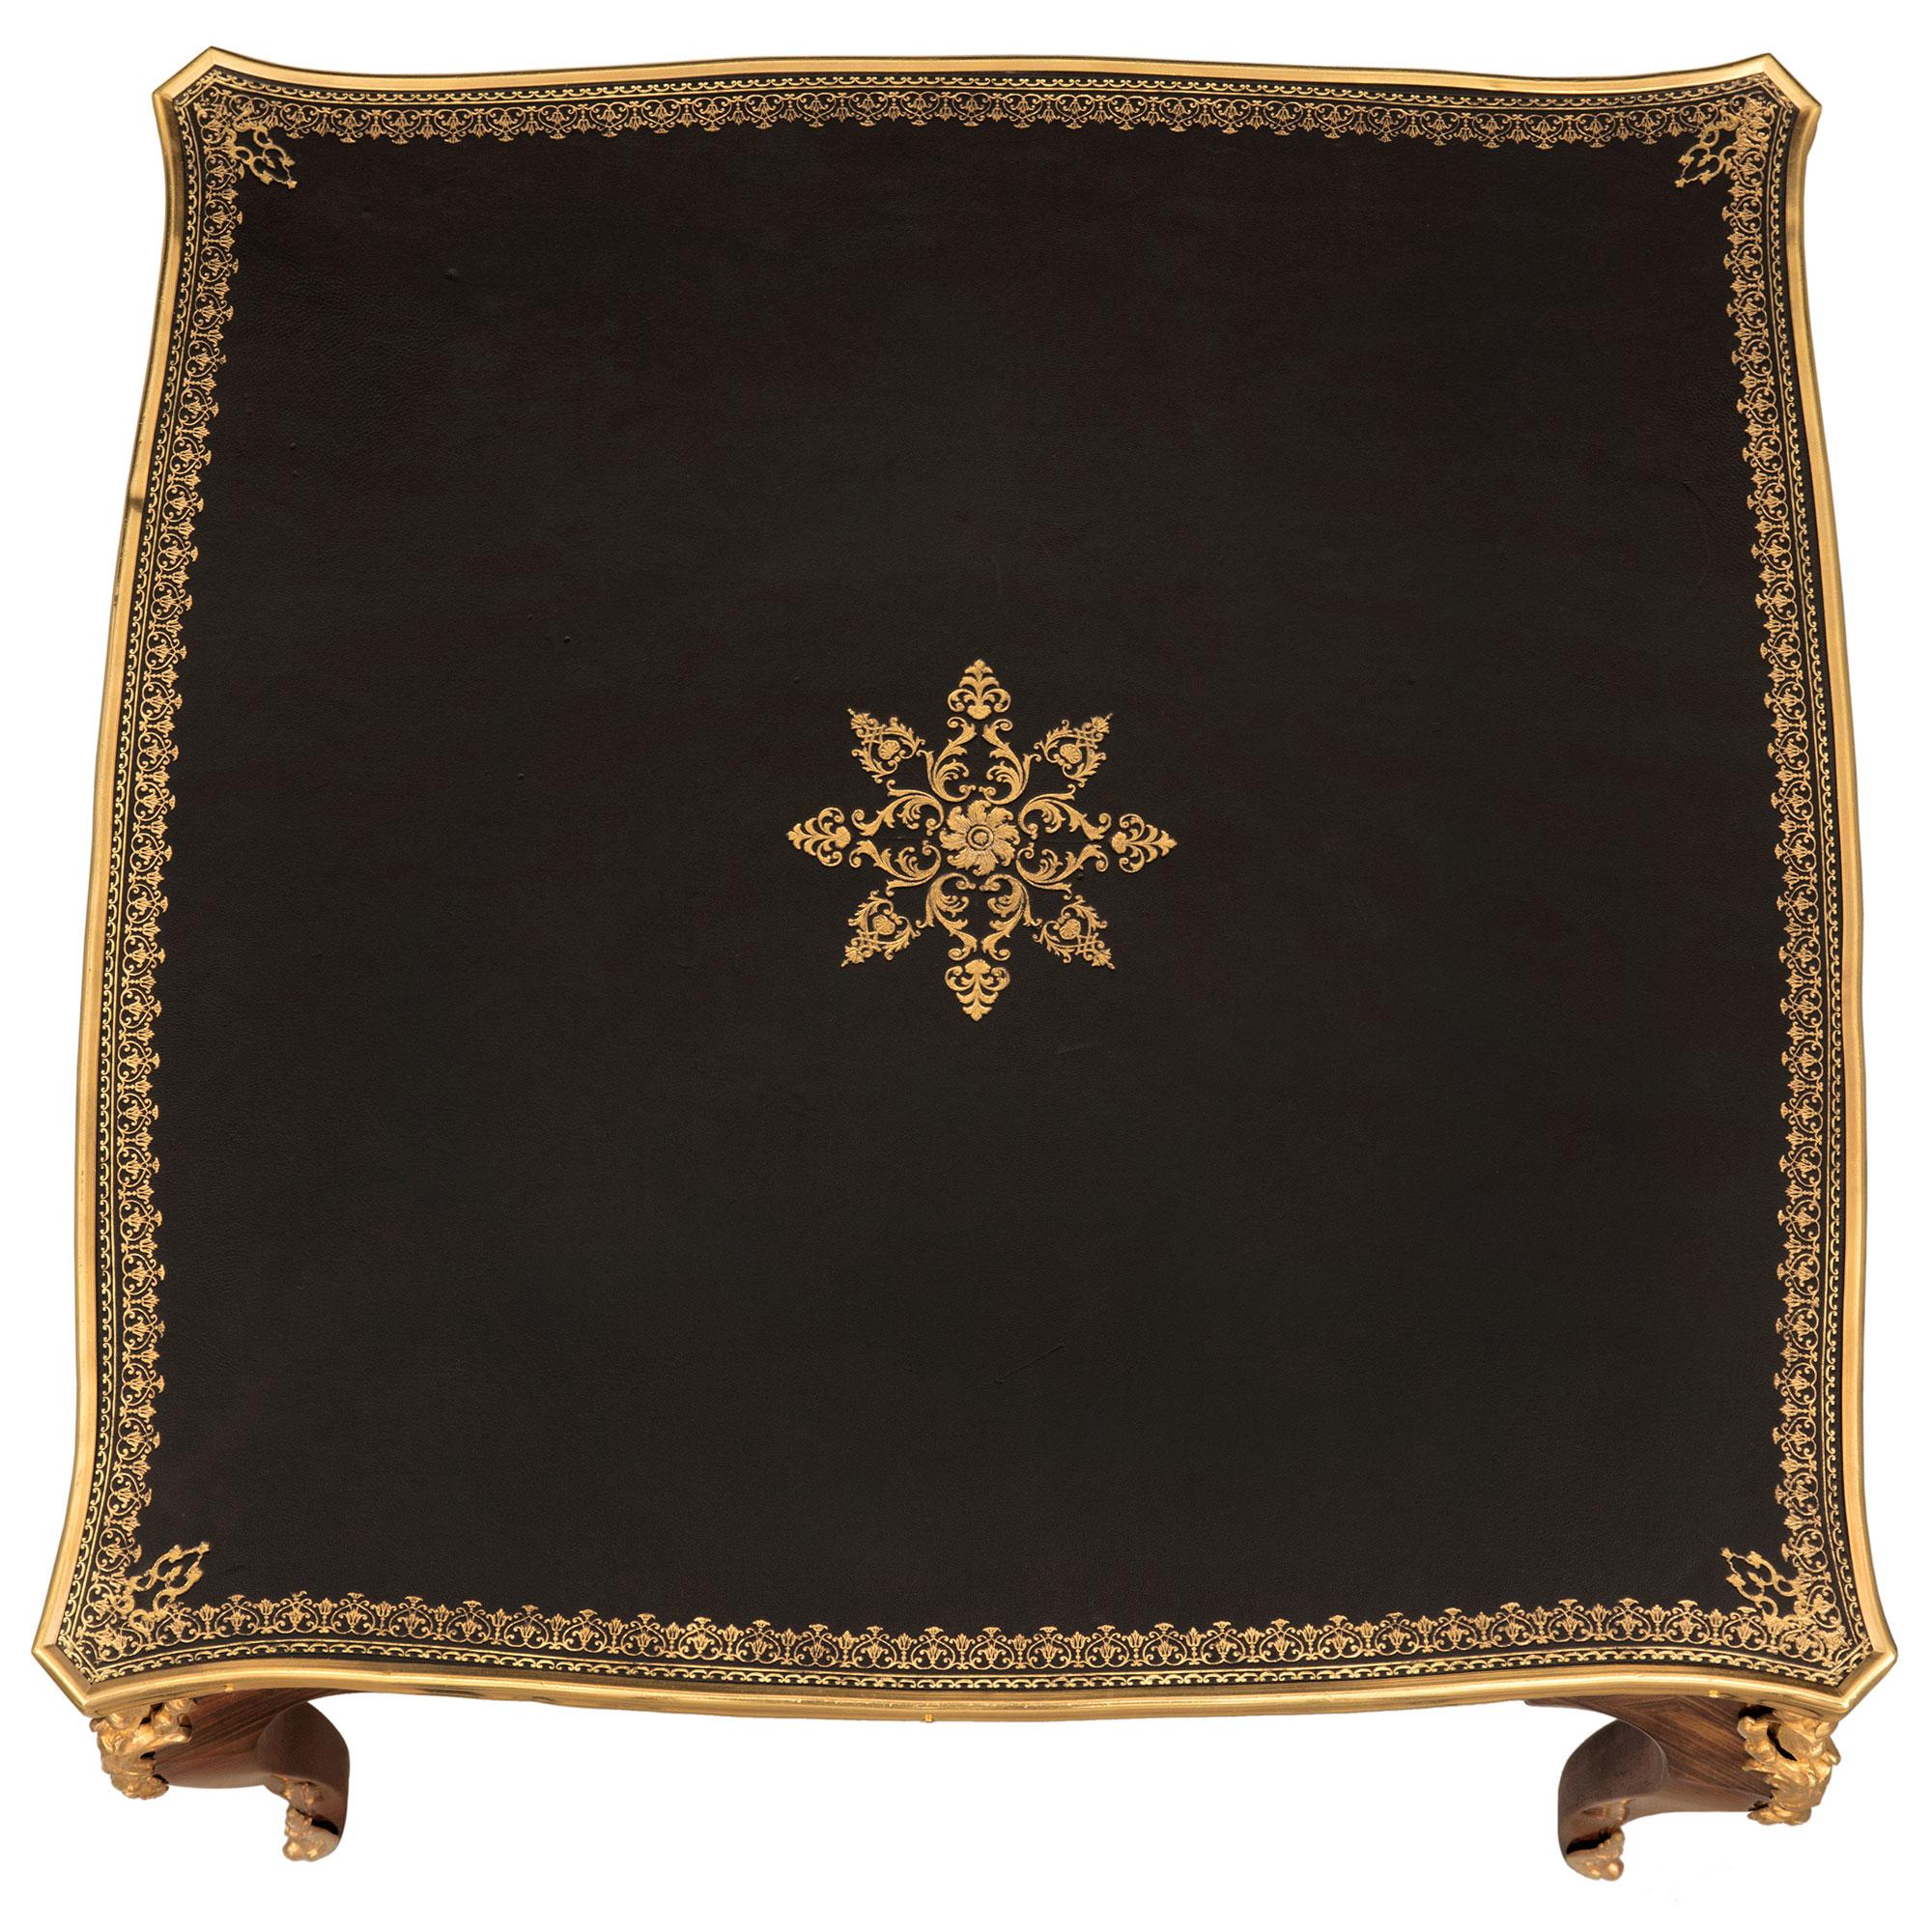 A most elegant French 19th century Louis XV st. kingwood and ormolu coffee table. The square table is raised by slender cabriole legs with finely chased ormolu sabots and striking pierced foliate corner mounts. The straight apron displays a most